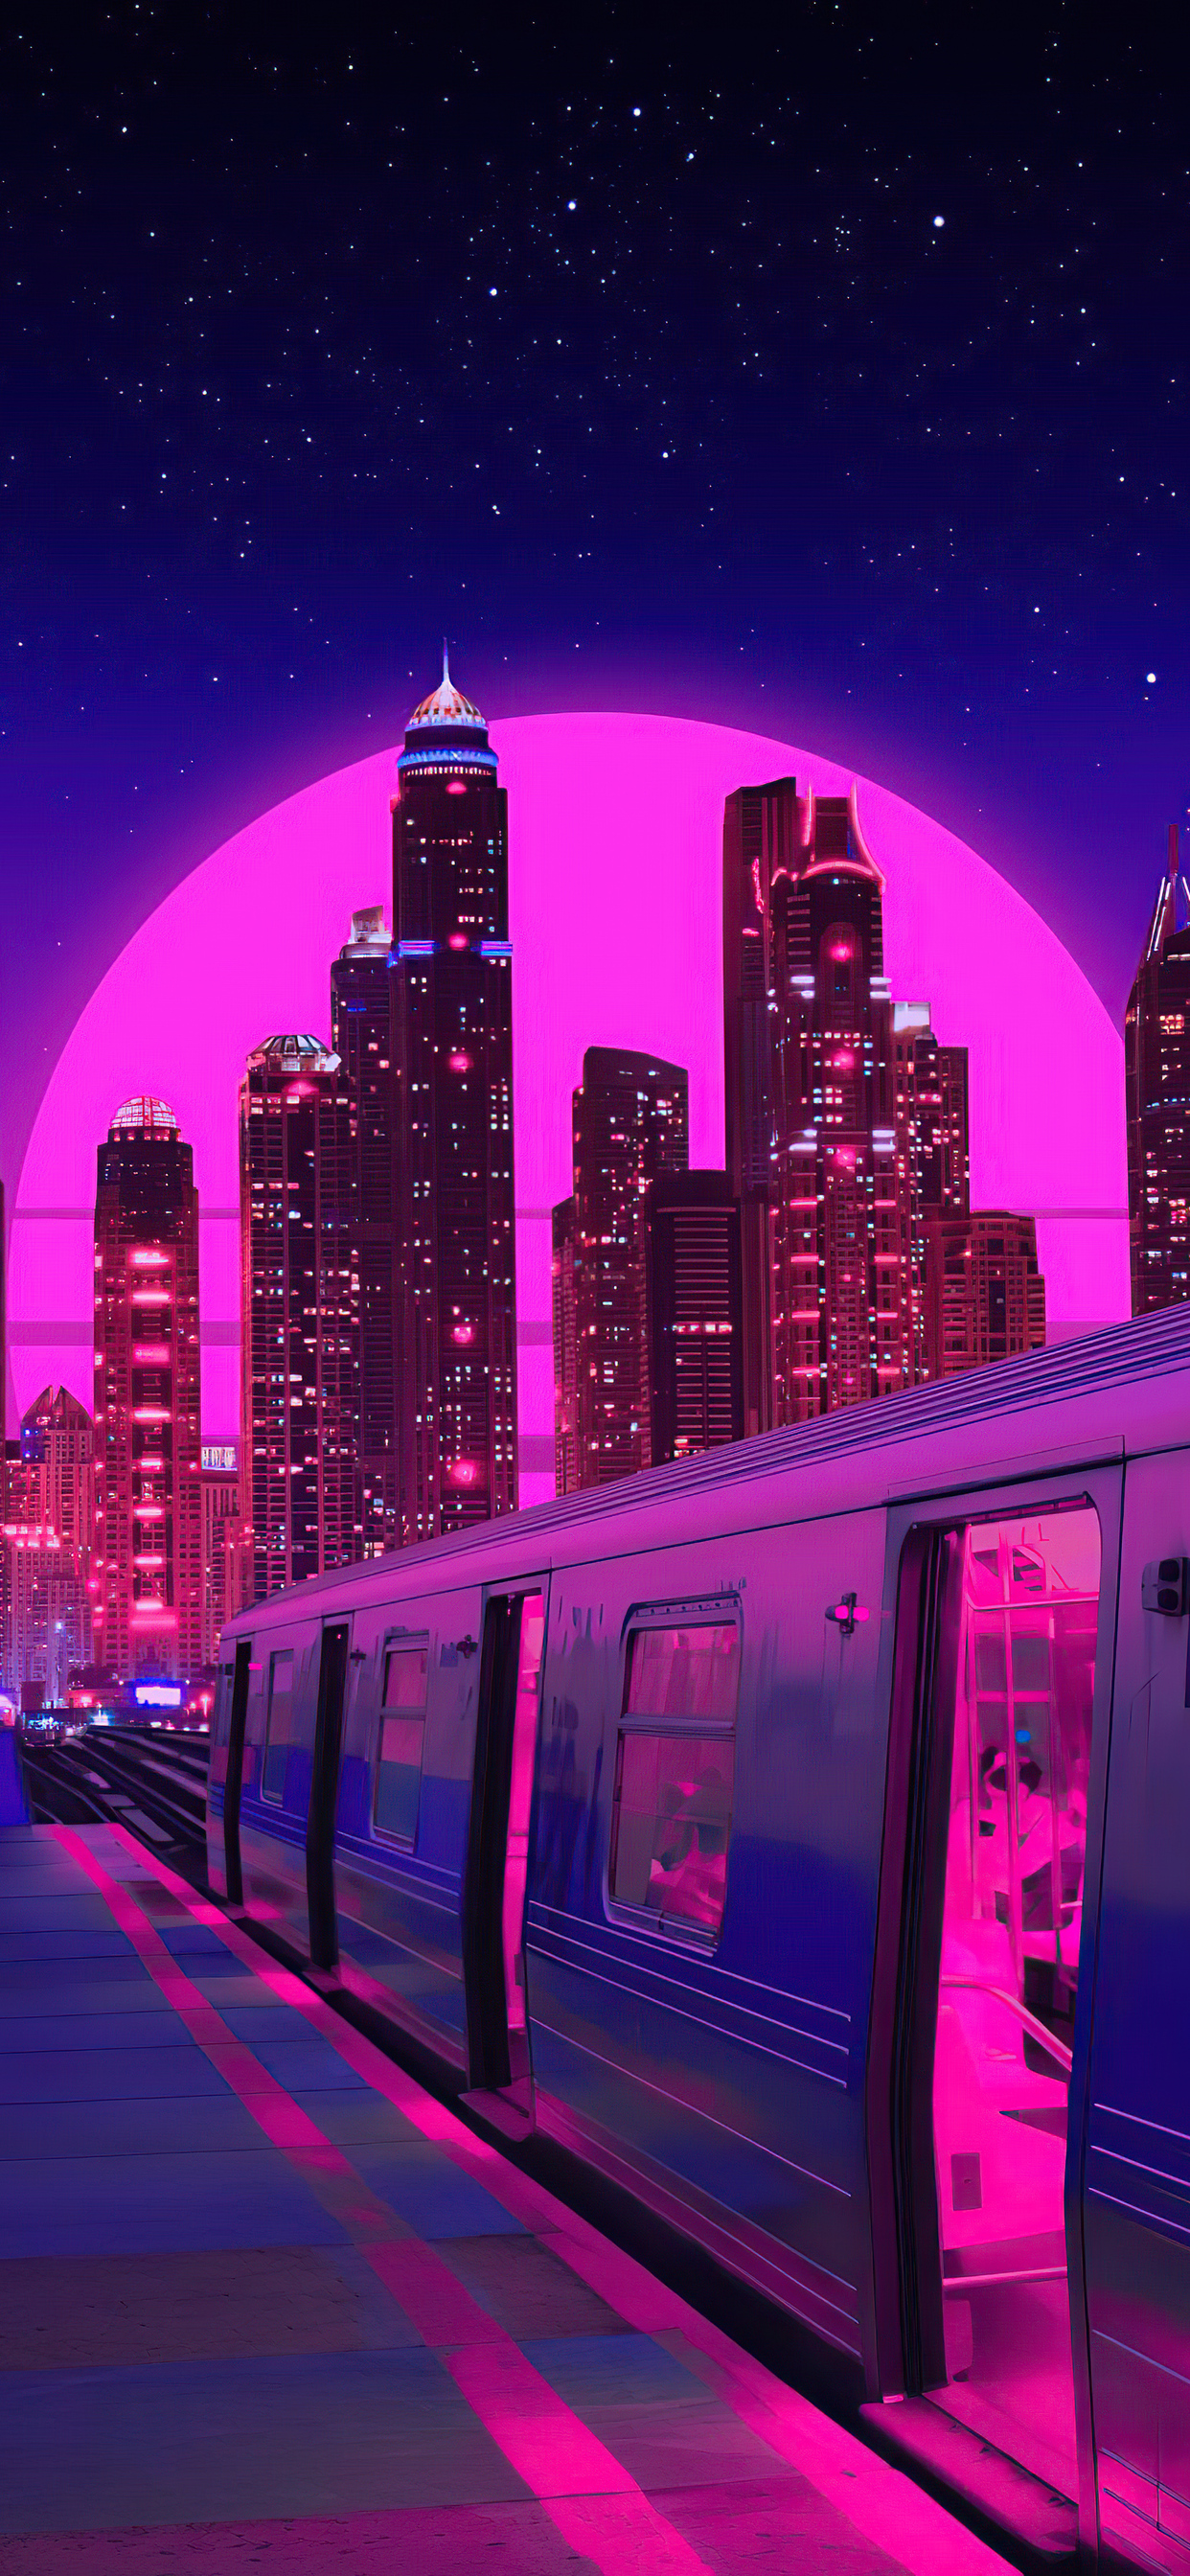 Train Aesthetic Wallpapers